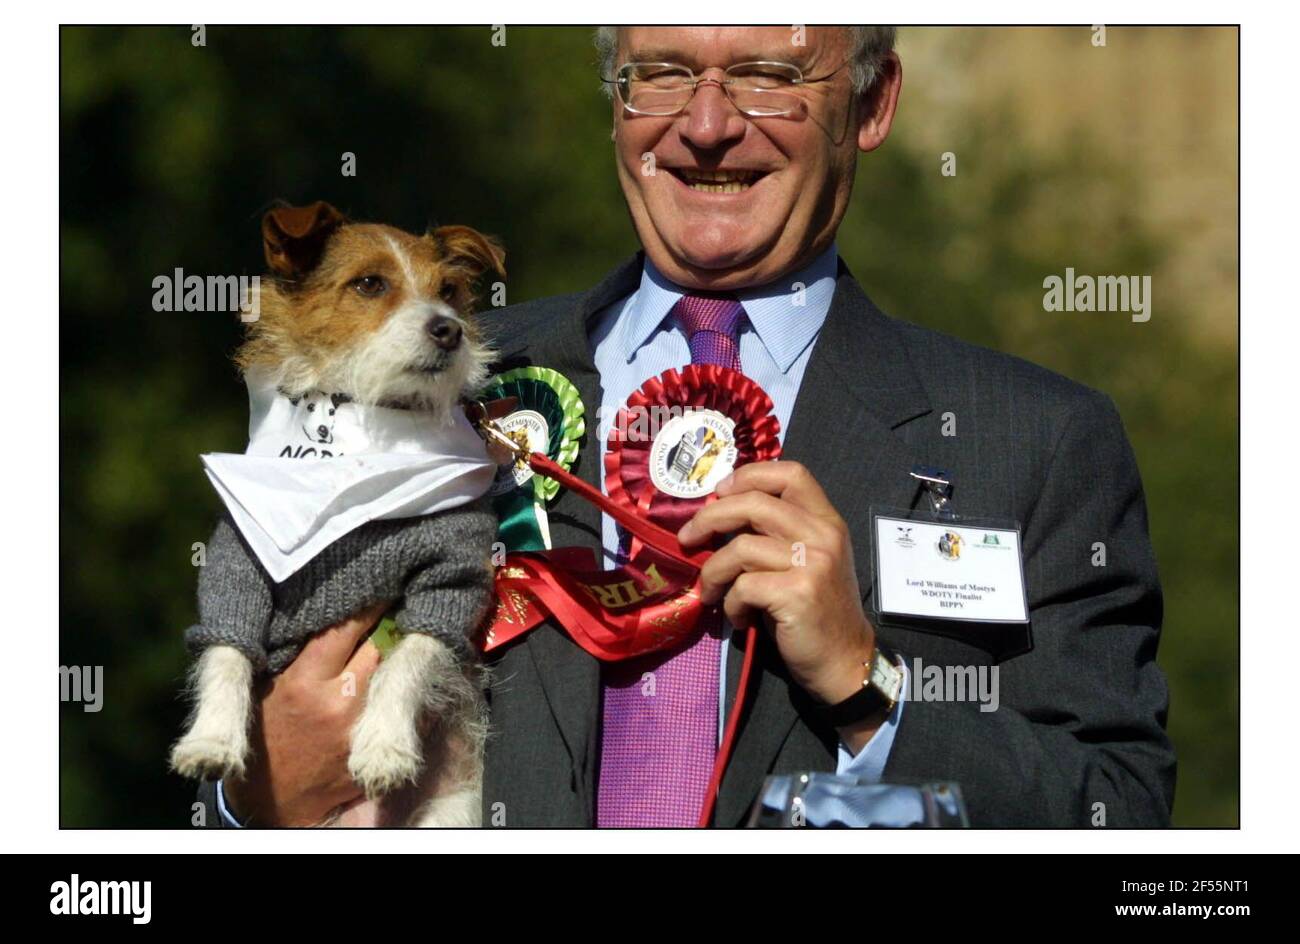 Westminster Dog of the Year competition is open to dogs from both houses and is run jointly by the National Defence League andthe Kennel Club. The comp. was won by Bippy the jack Russel Terrier owned by Lord William of Mostyn, leader of the houseof lords.pic David Sandison 17/10/2002 Stock Photo